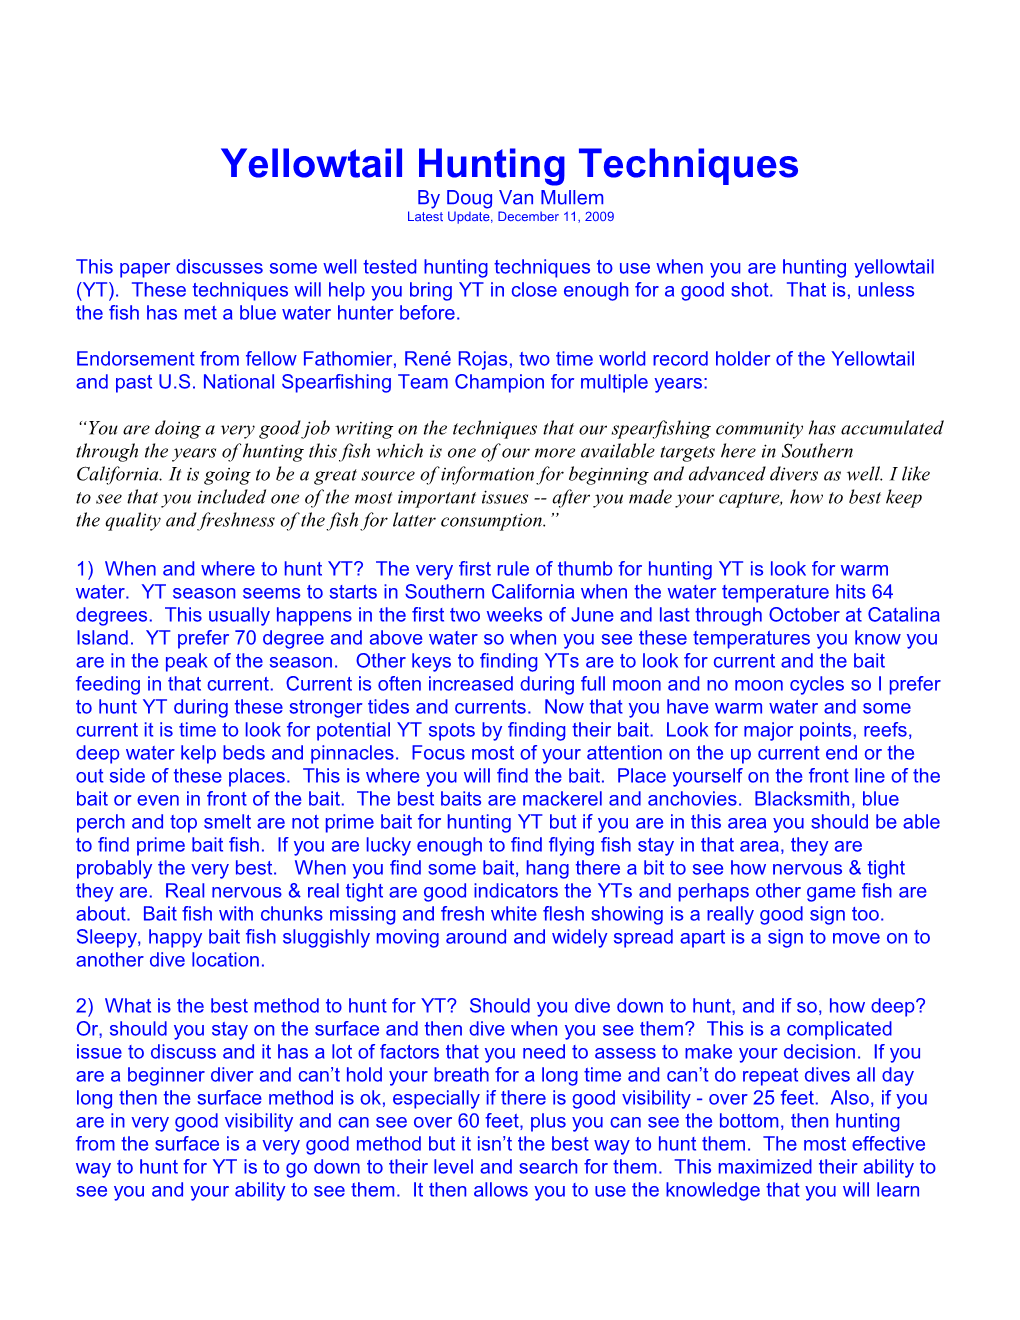 Techniques for Hunting Yellow Tails (YT)